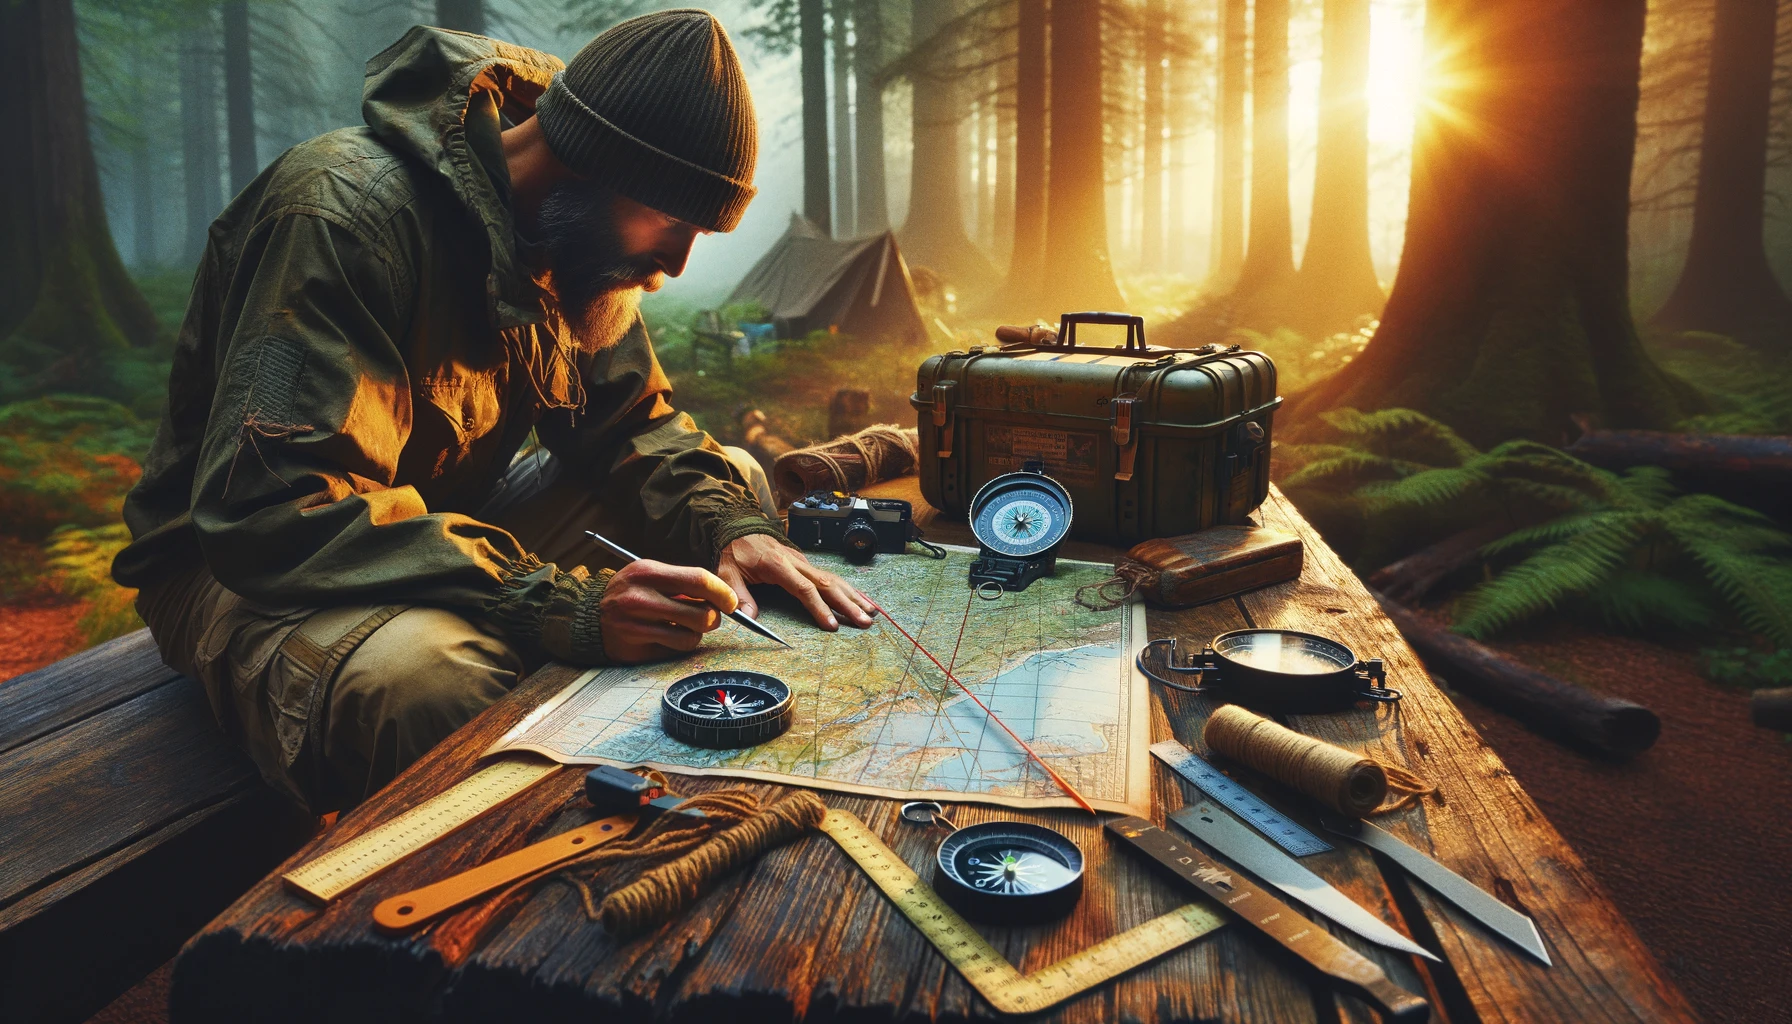 An individual engaged in plotting a course on a map with a compass and ruler, set against an outdoor backdrop, emphasizing precision in map reading and navigation skills in survival scenarios